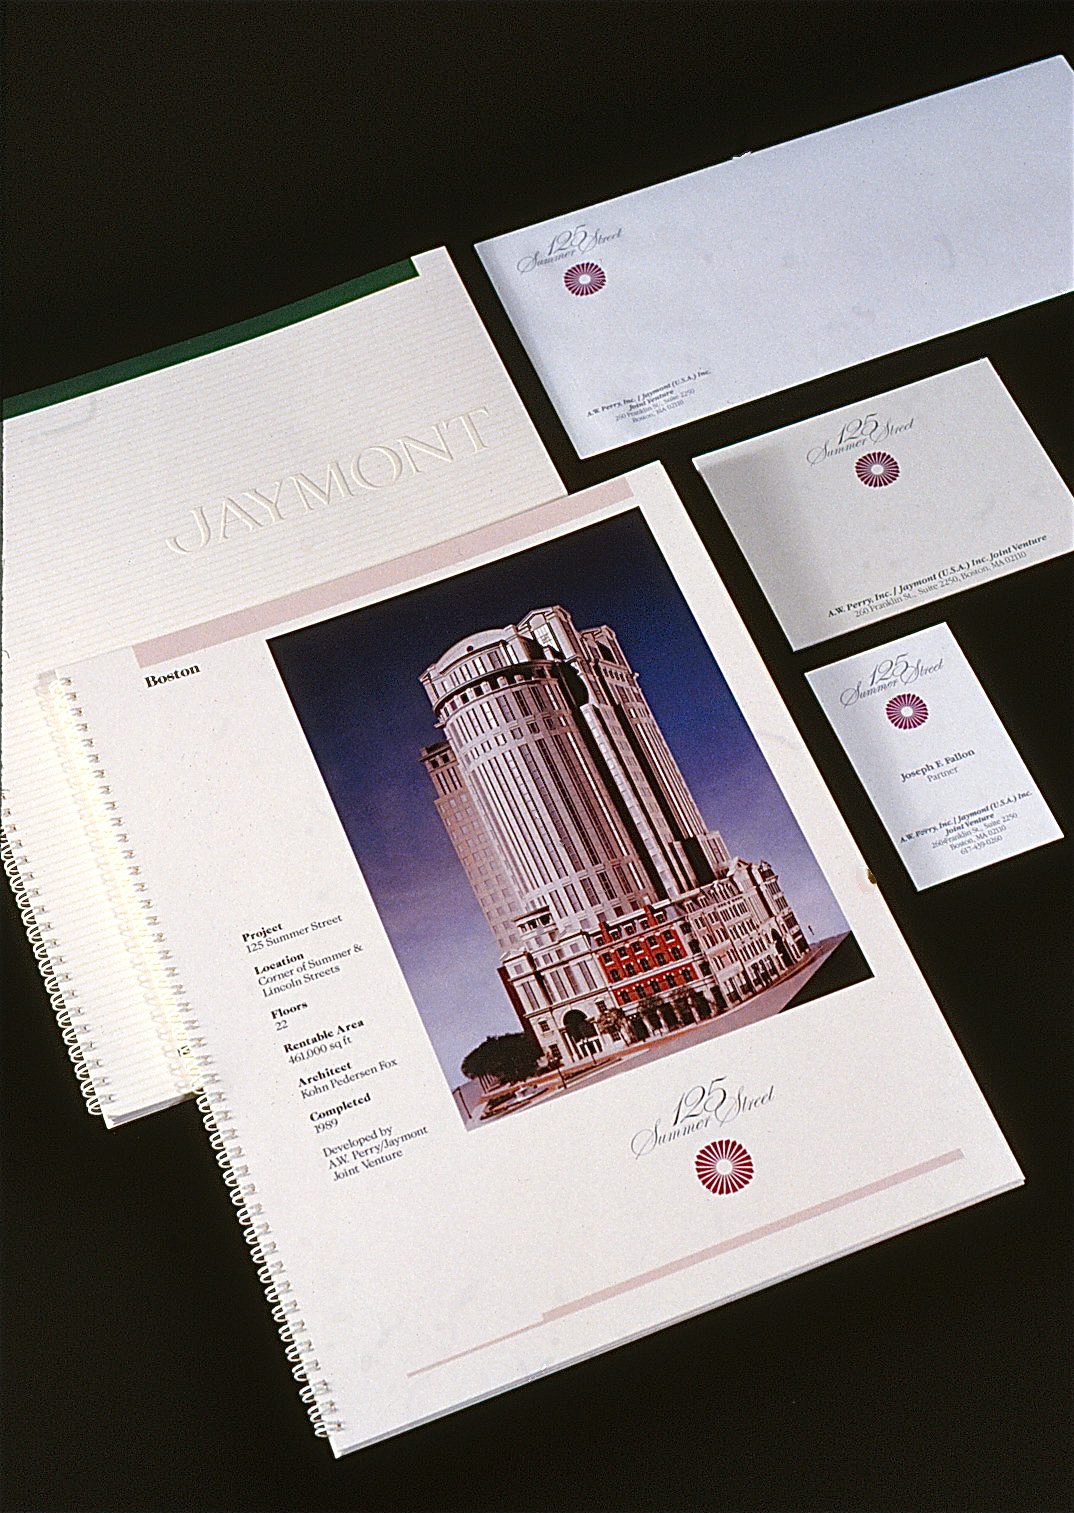 The symbol and logotype displayed on letterhead, envelope, and business cards.